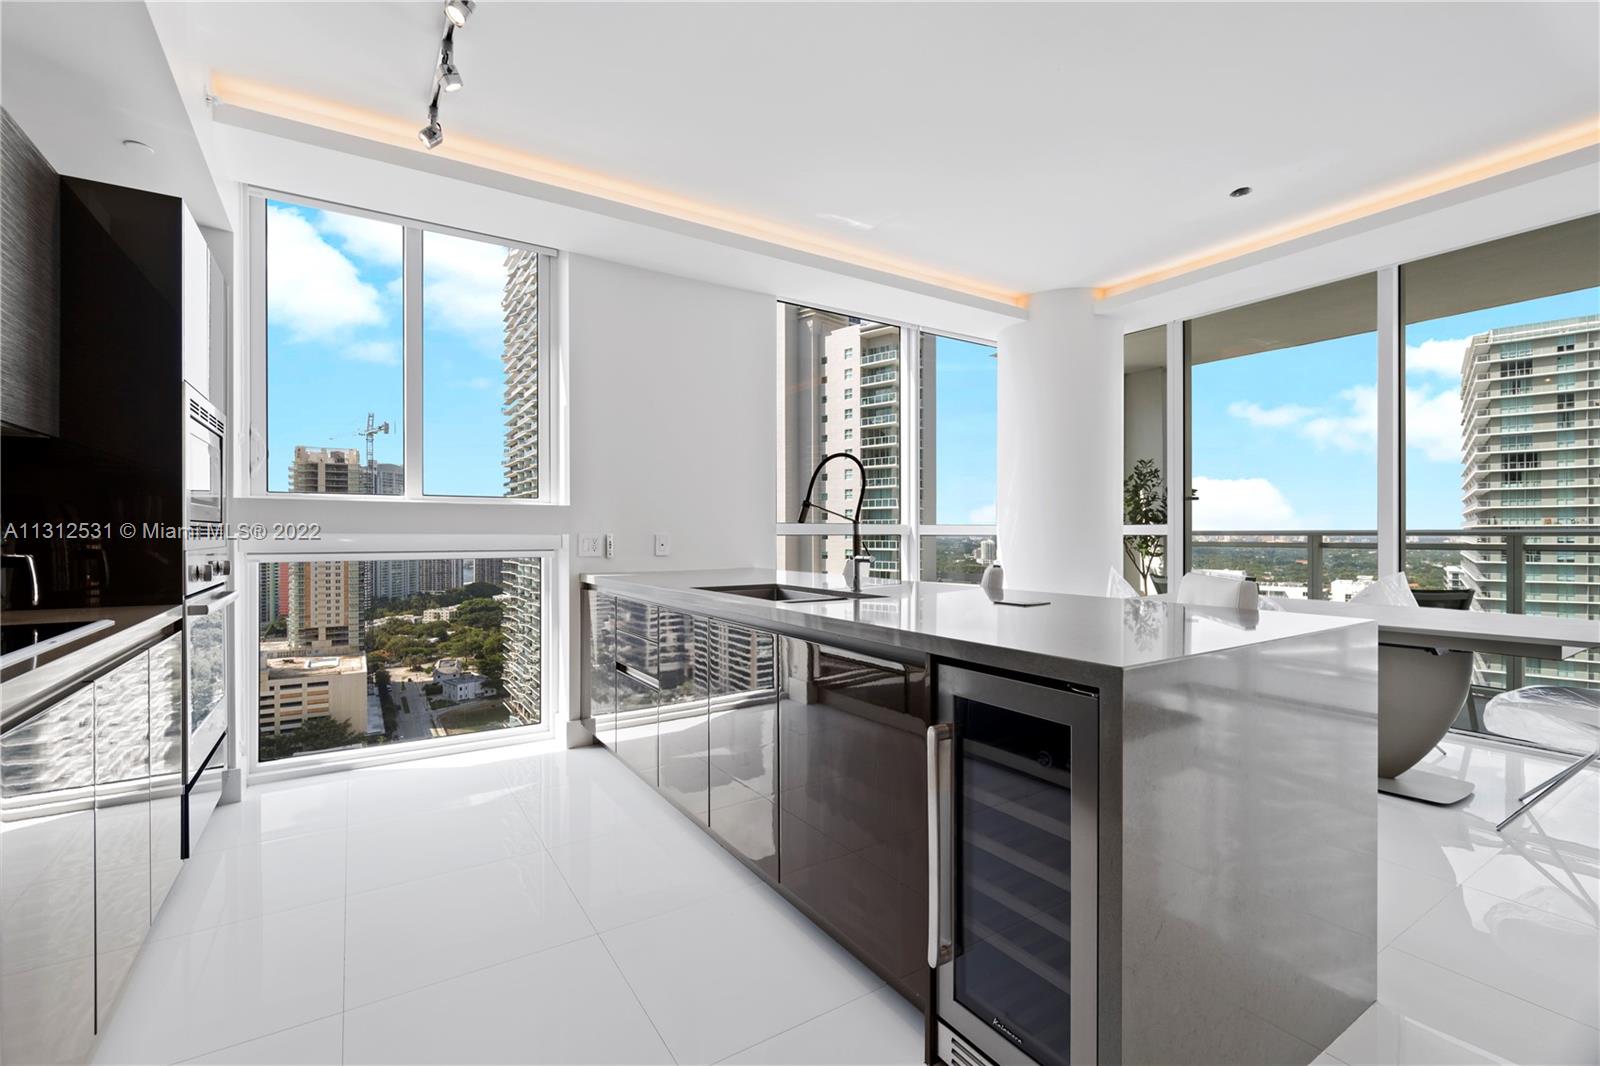 FULLY UPGRADED like new, barely used since 2016!! Two Bedroom/  Two Bath apartment available for sale at one of Brickell's finest condominiums, The Bond. This spacious and bright apartment features stunning porcelain tiles floors, custom recessed and soffit lighting, motorized rolling blinds, upgraded master bedroom and bathroom with TOTO Washlet toilet, home office with custom millwork, custom closet build outs, and more. Kitchens are finished with NOLTE cabinetry and PORCELANOSA fixtures. Spectacular city views from the expansive private balcony. The Bond offers unparalleled amenities including spa complete with steam room and sauna, private cabanas with outdoor kitchen and grill, state of the art gym, library, swimming pool, and hot tub.